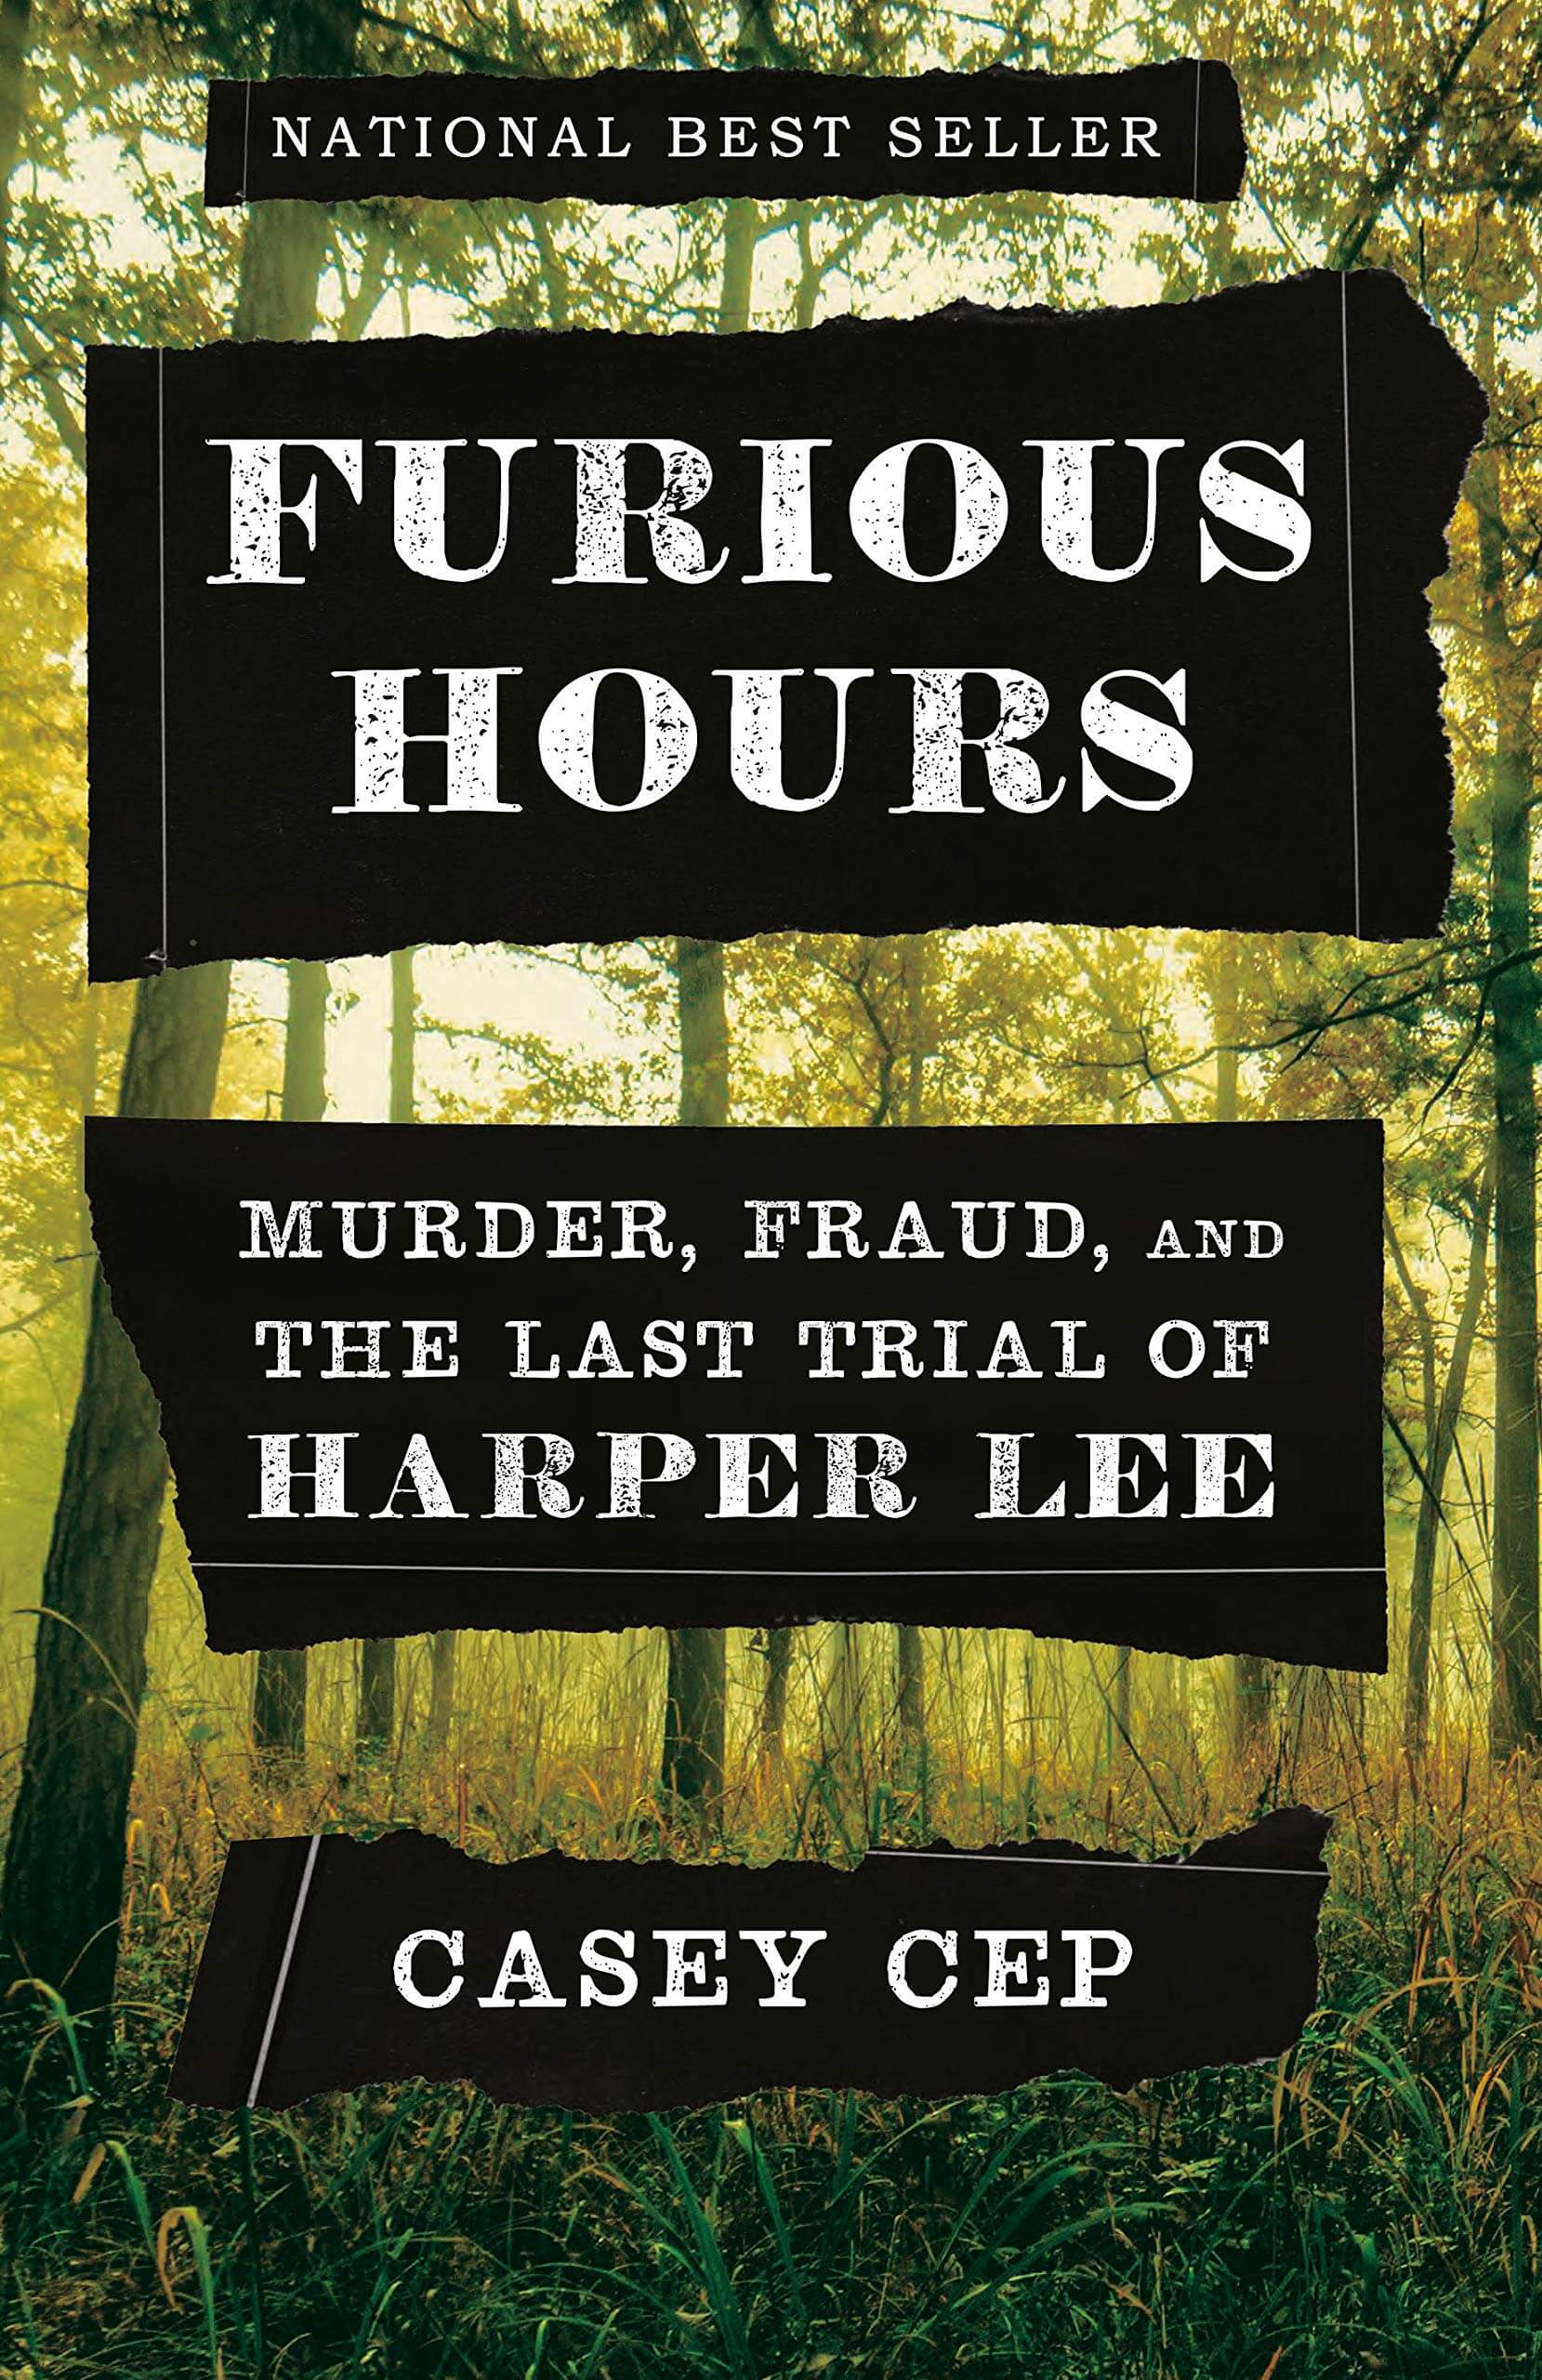 Cover of Furious Hours: Murder, Fraud, and The Last Trial of Harper Lee by Casey Cep